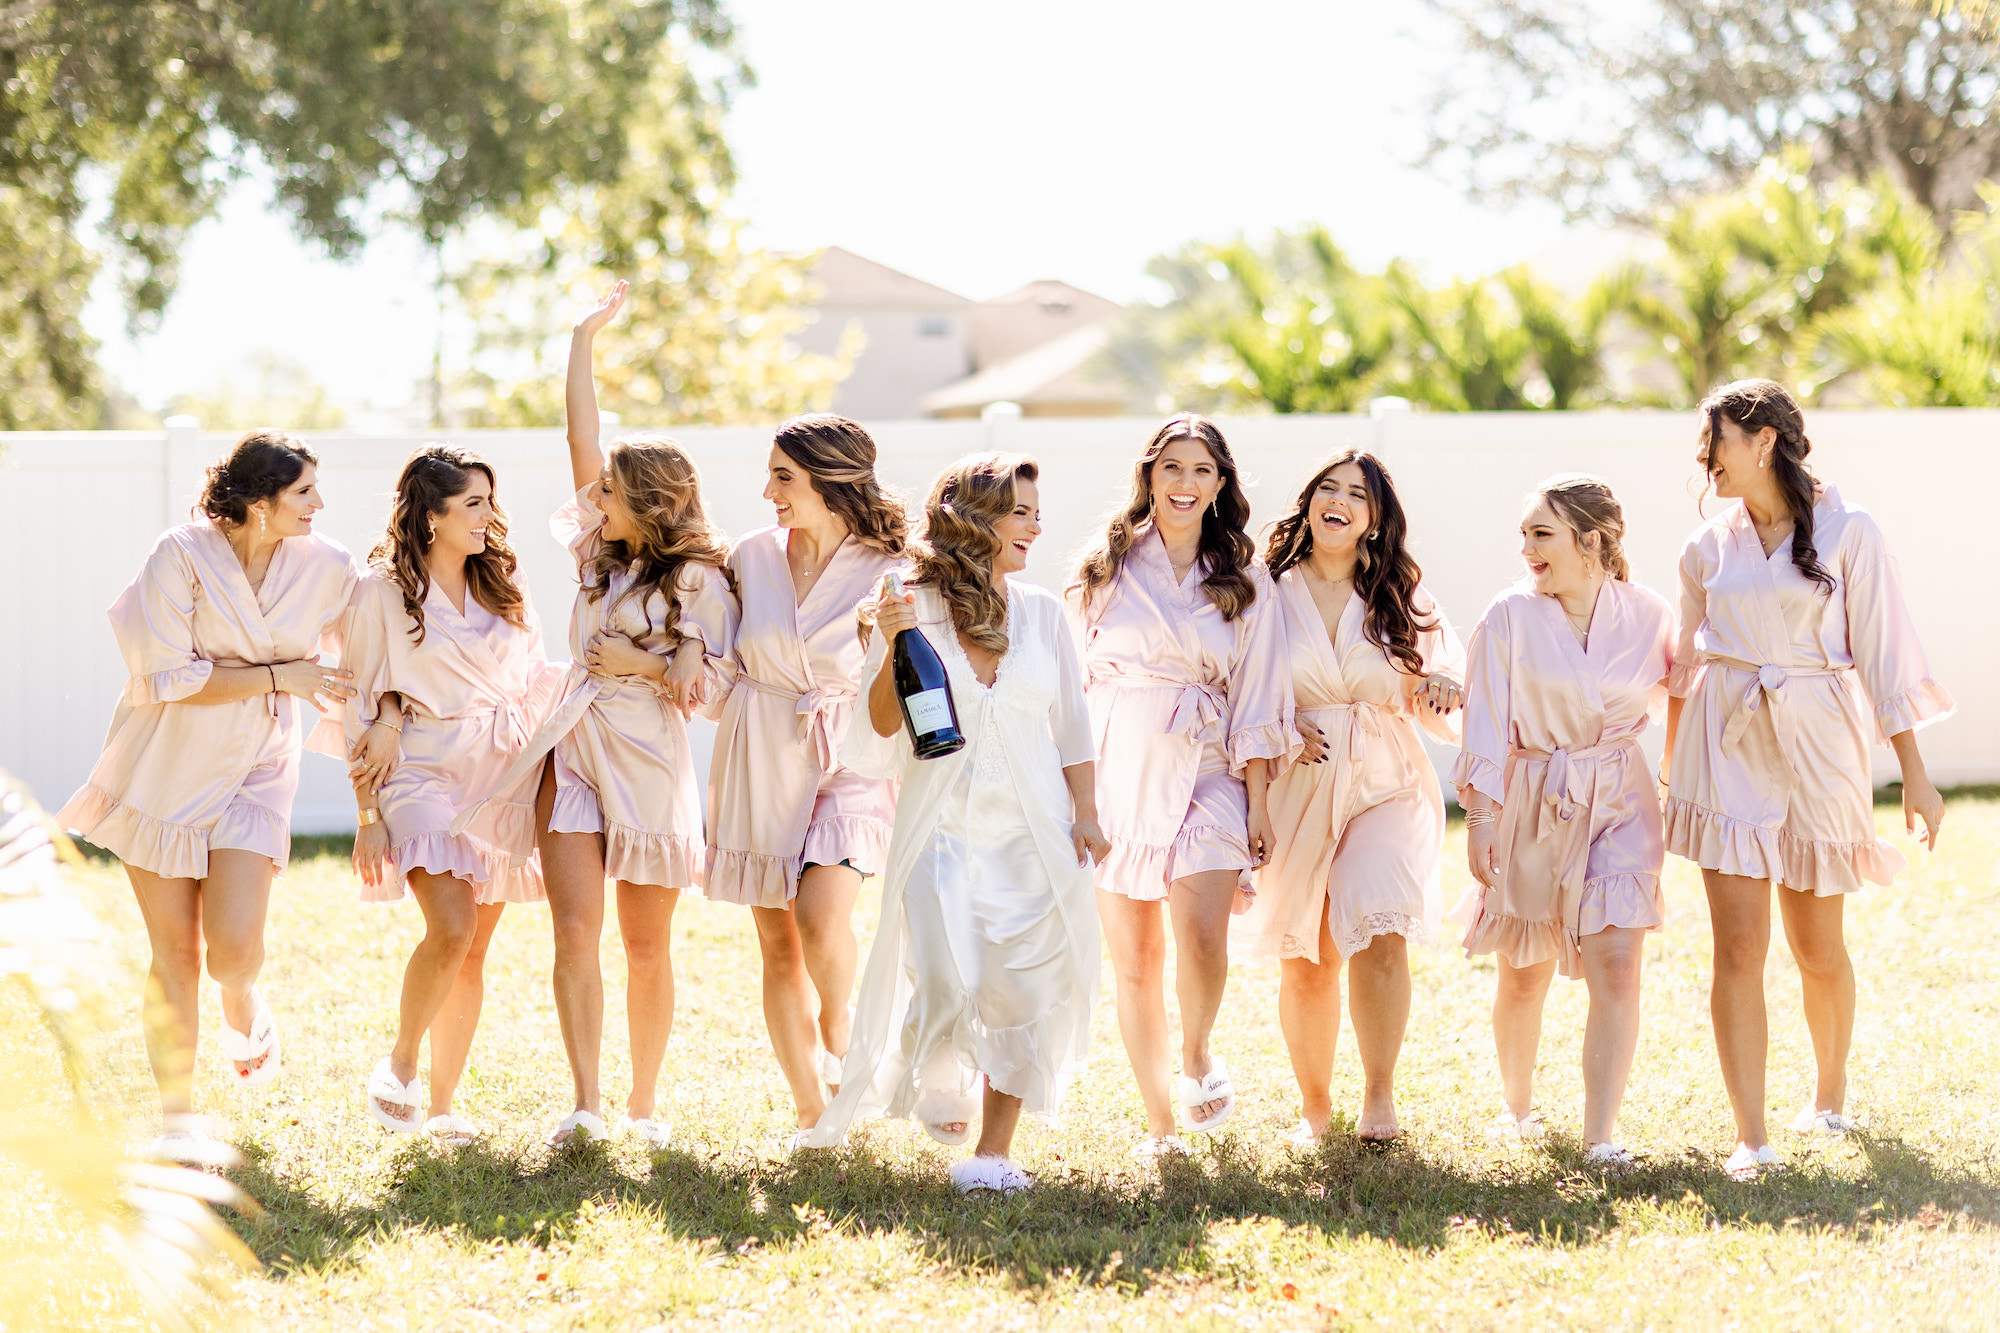 Fall Boho Bride and Bridesmaids with Bottle of Champagne and Matching Pink Robes | Tampa Bay Wedding Hair and Makeup Femme Akoi Beauty Studio